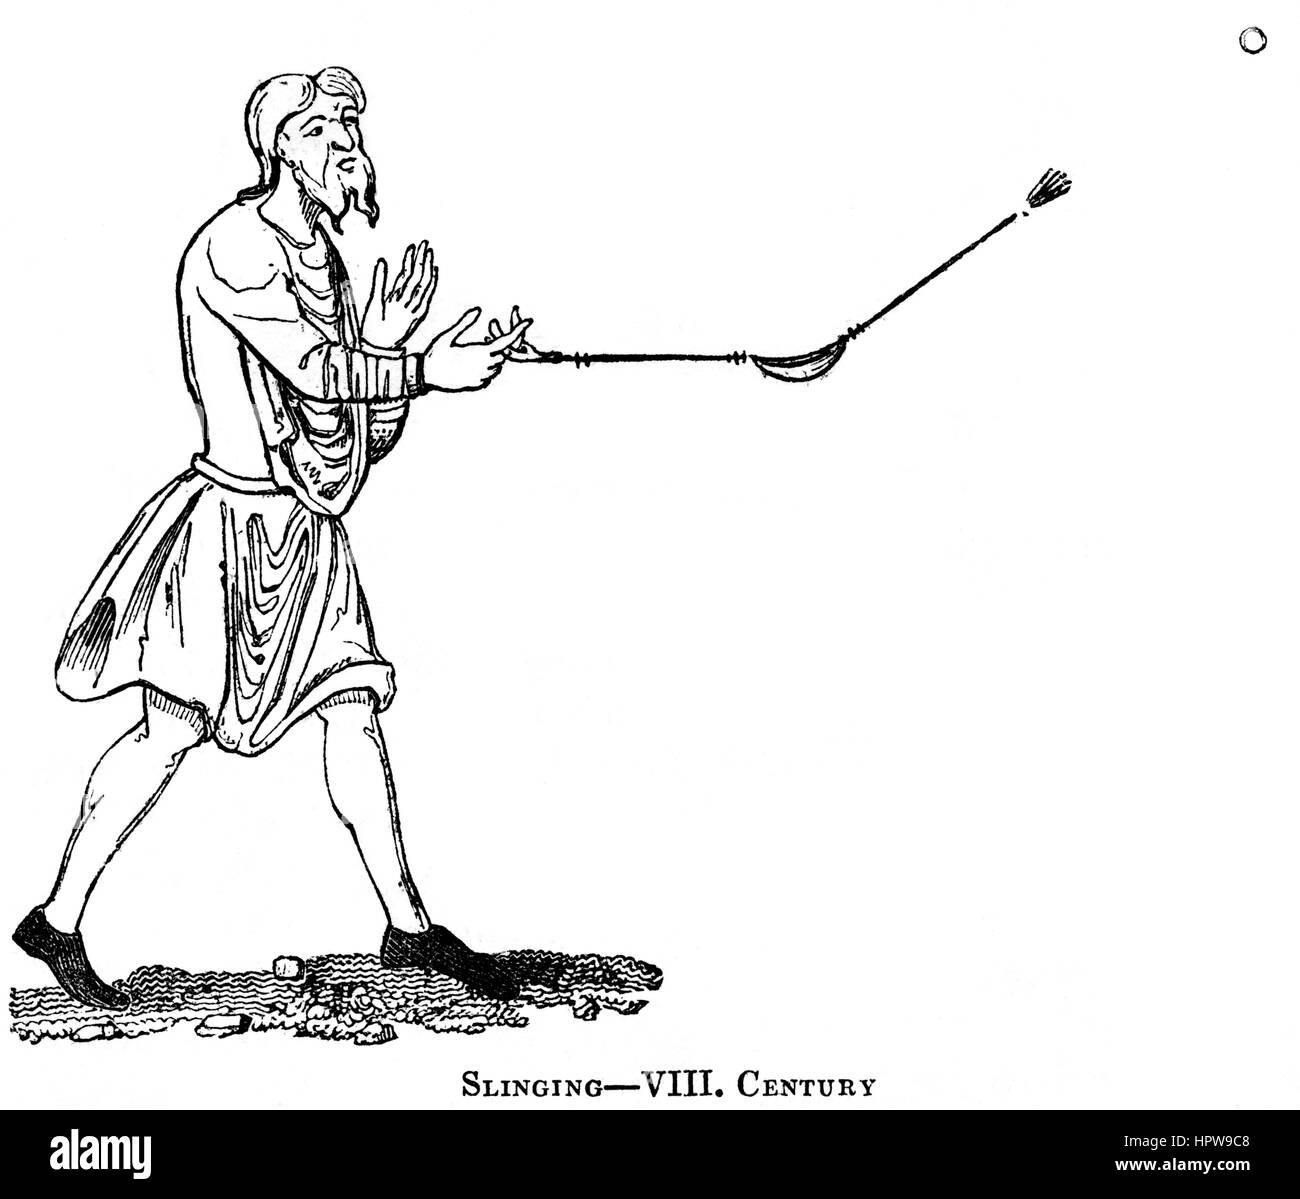 An illustration of Slinging in the 8th Century scanned at high resolution from a book printed in 1831.  Believed copyright free. Stock Photo